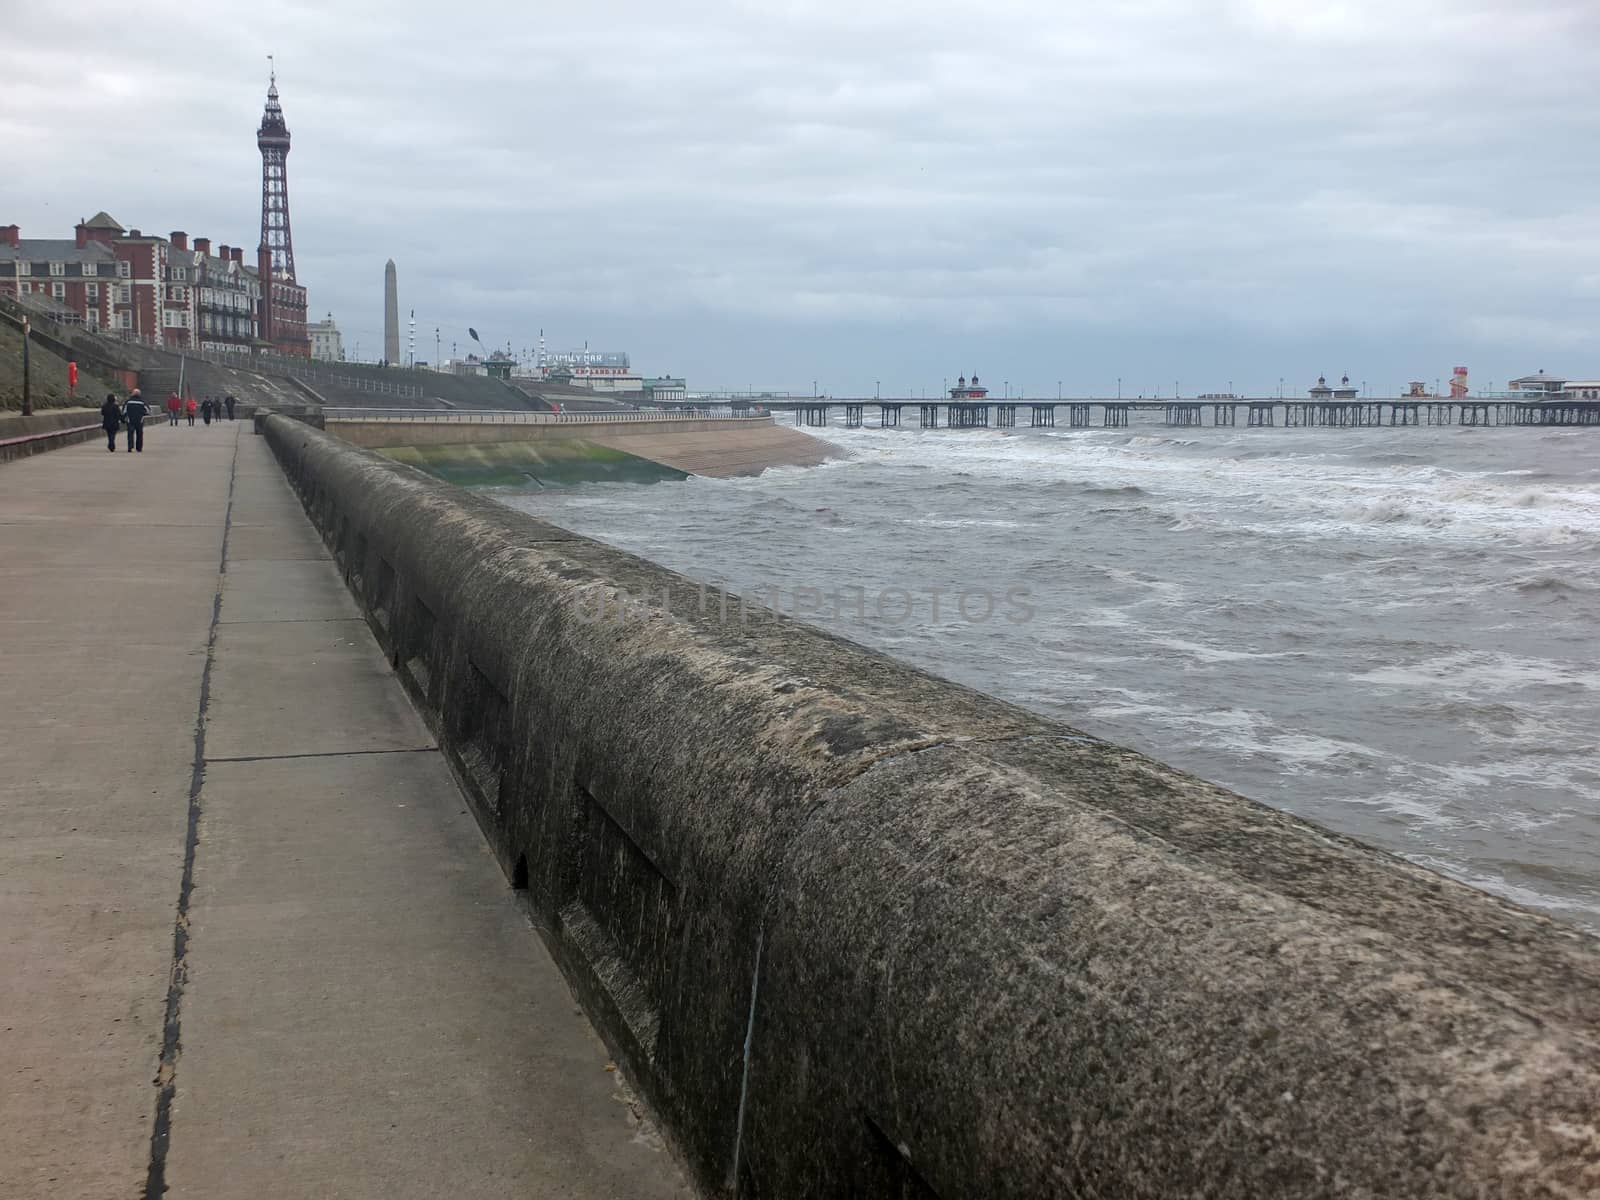 a view of blackpool promenade in winter with stormy sea tower and central pier with unidentifiable people walking along the seafront by philopenshaw